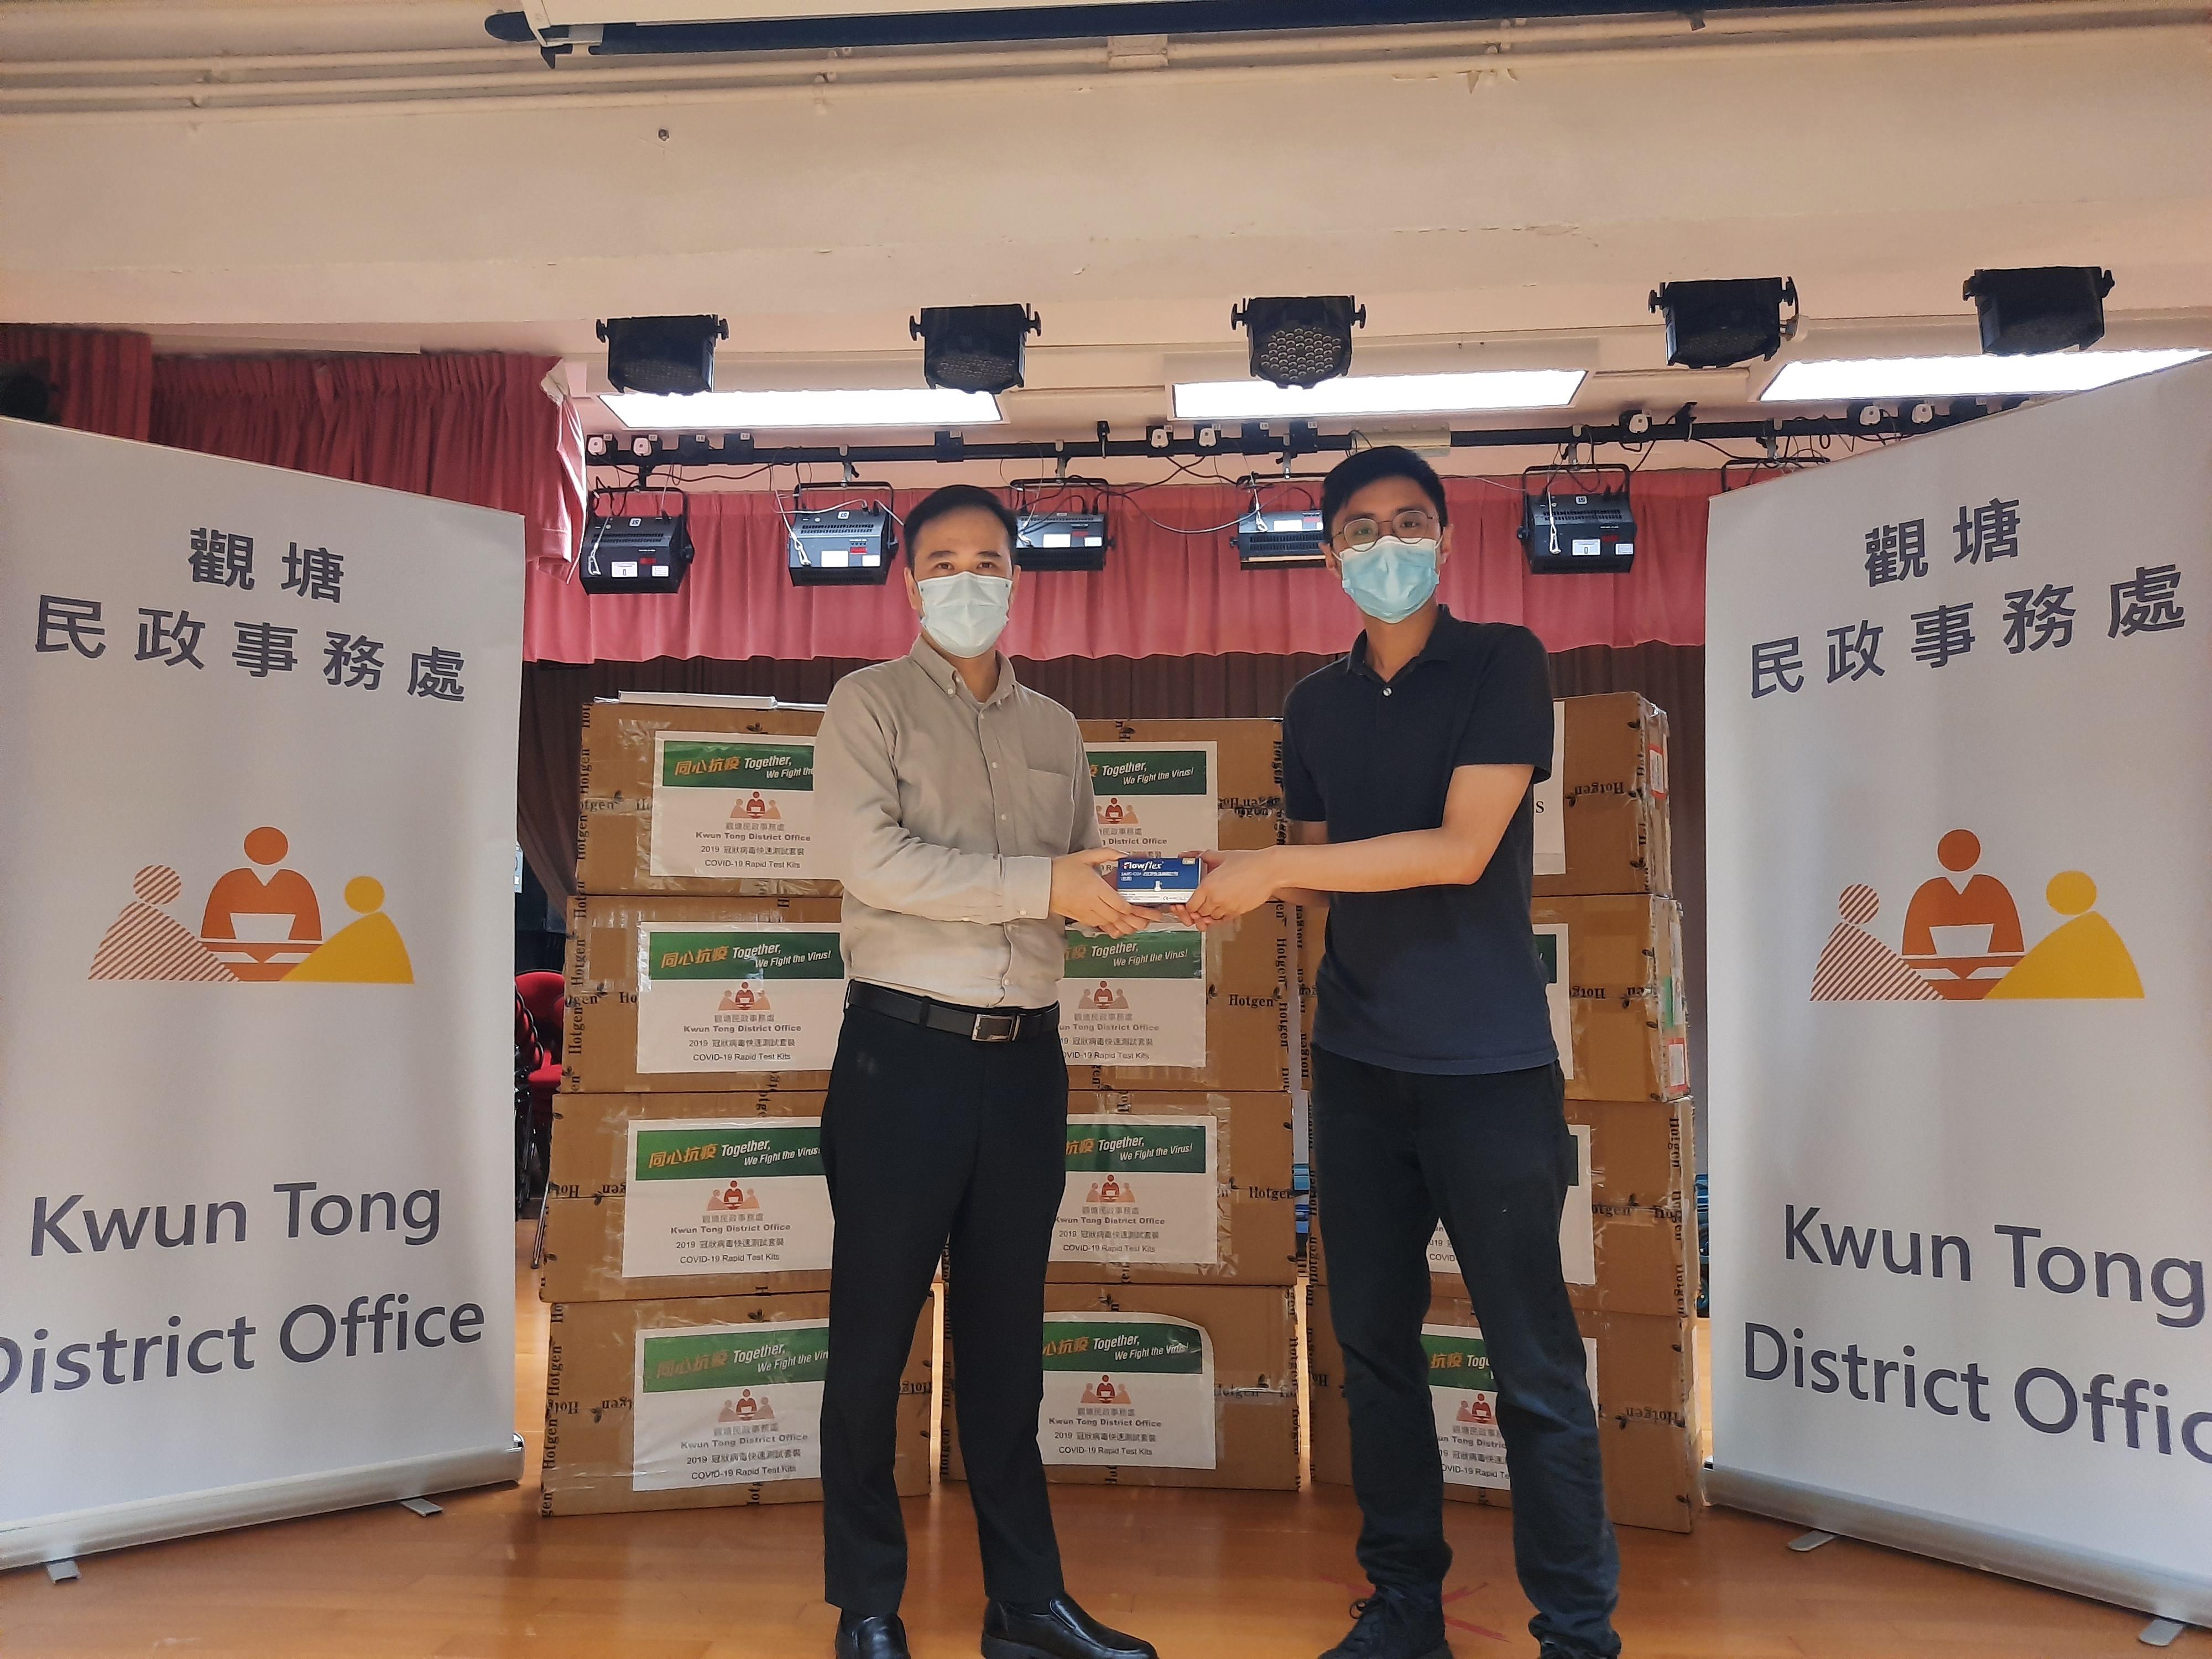 The Kwun Tong District Office today (June 24) distributed COVID-19 rapid test kits to households, cleansing workers and property management staff living and working in Hiu Ming Court and Hiu Kwong Court for voluntary testing through the property management company.